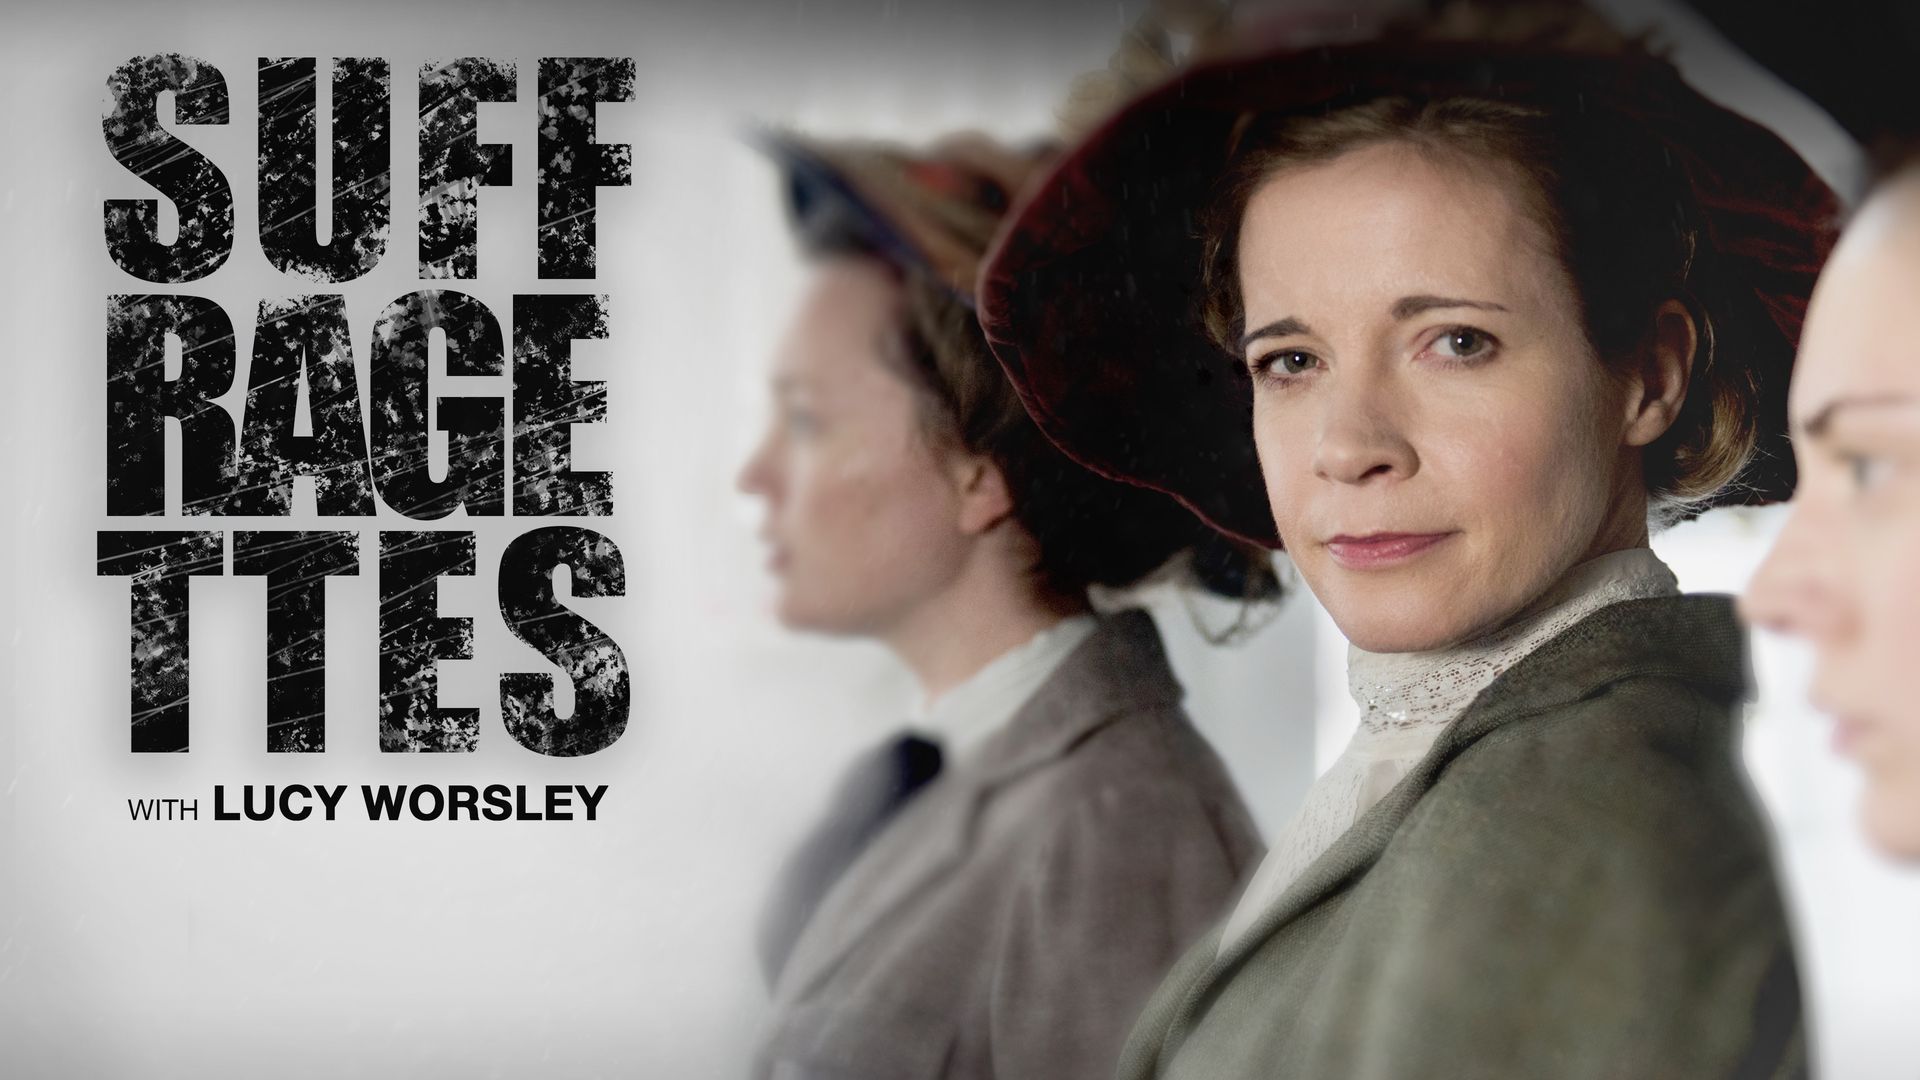 Suffragettes with Lucy Worsley Backdrop